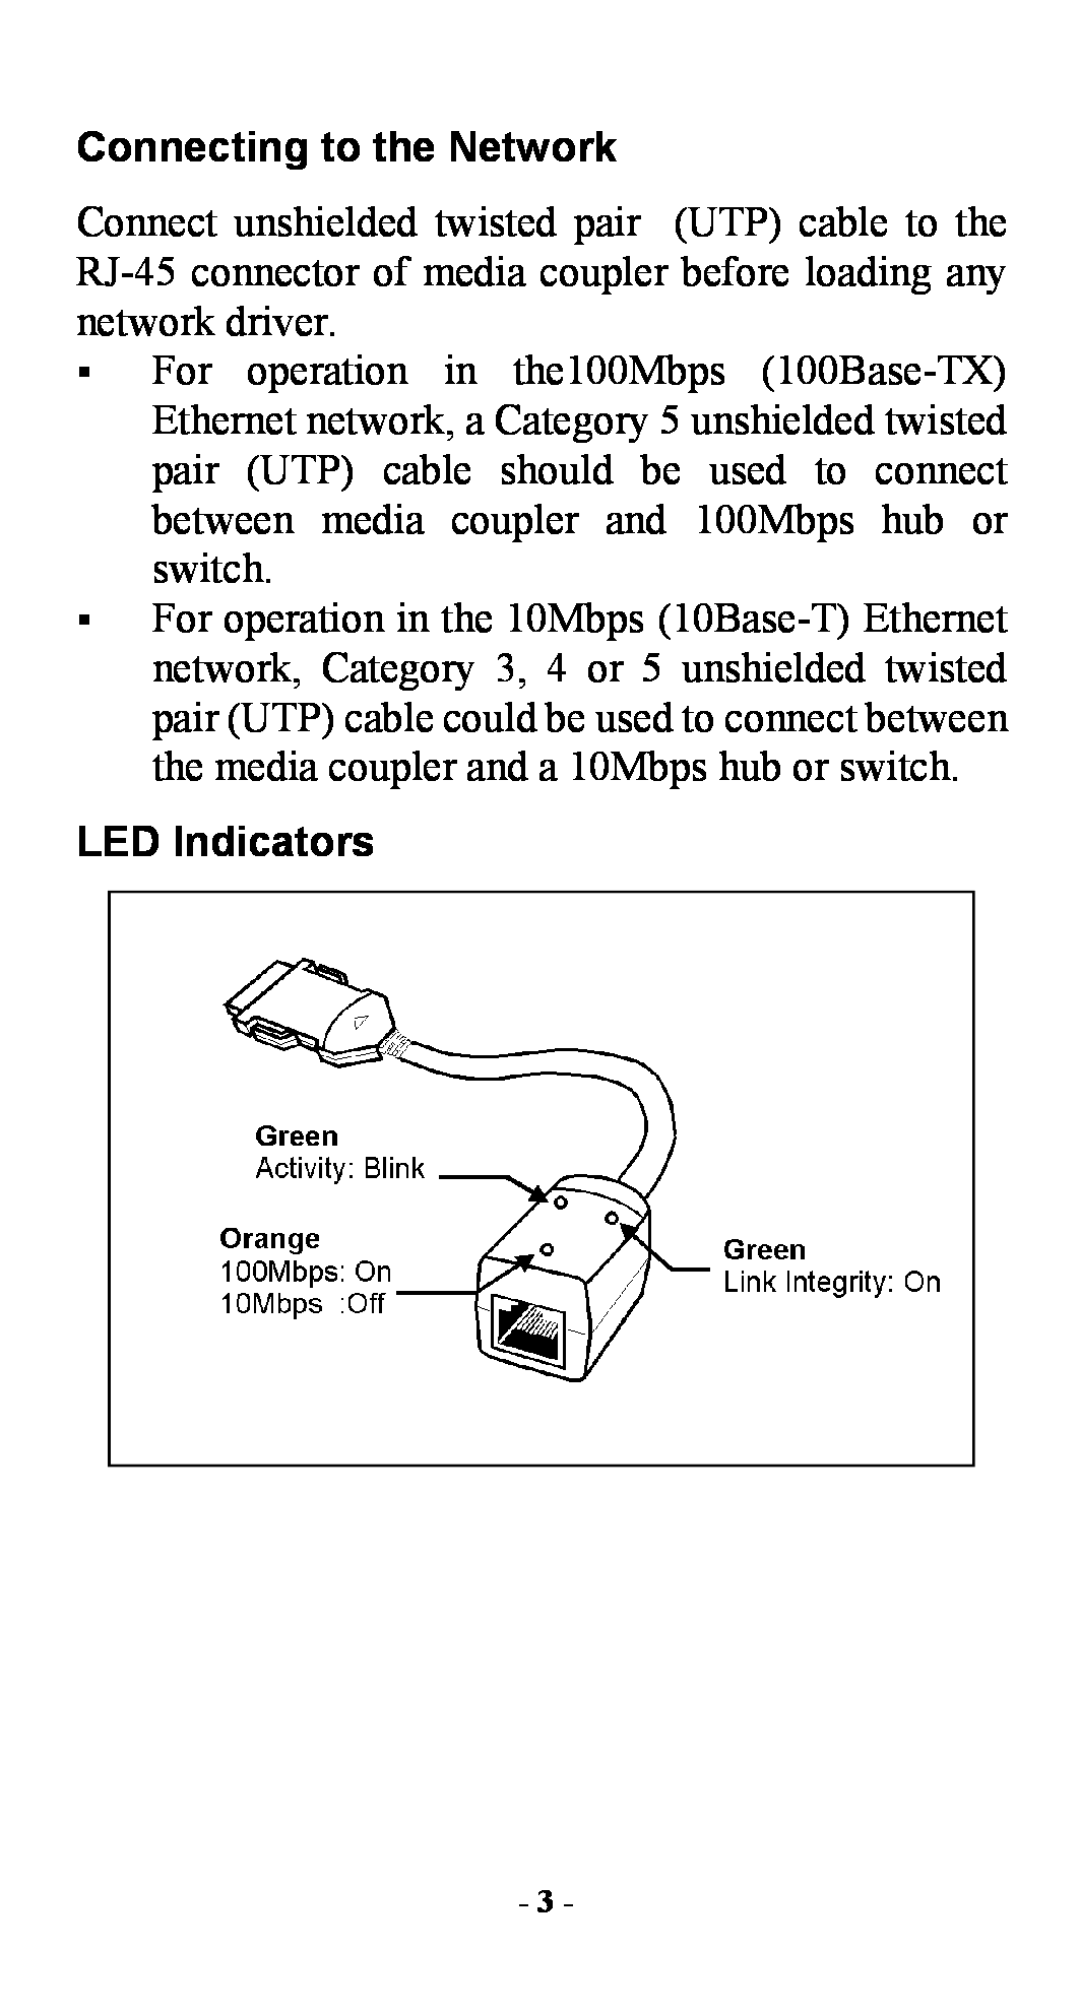 Abocom FE2000 manual Connecting to the Network, LED Indicators 